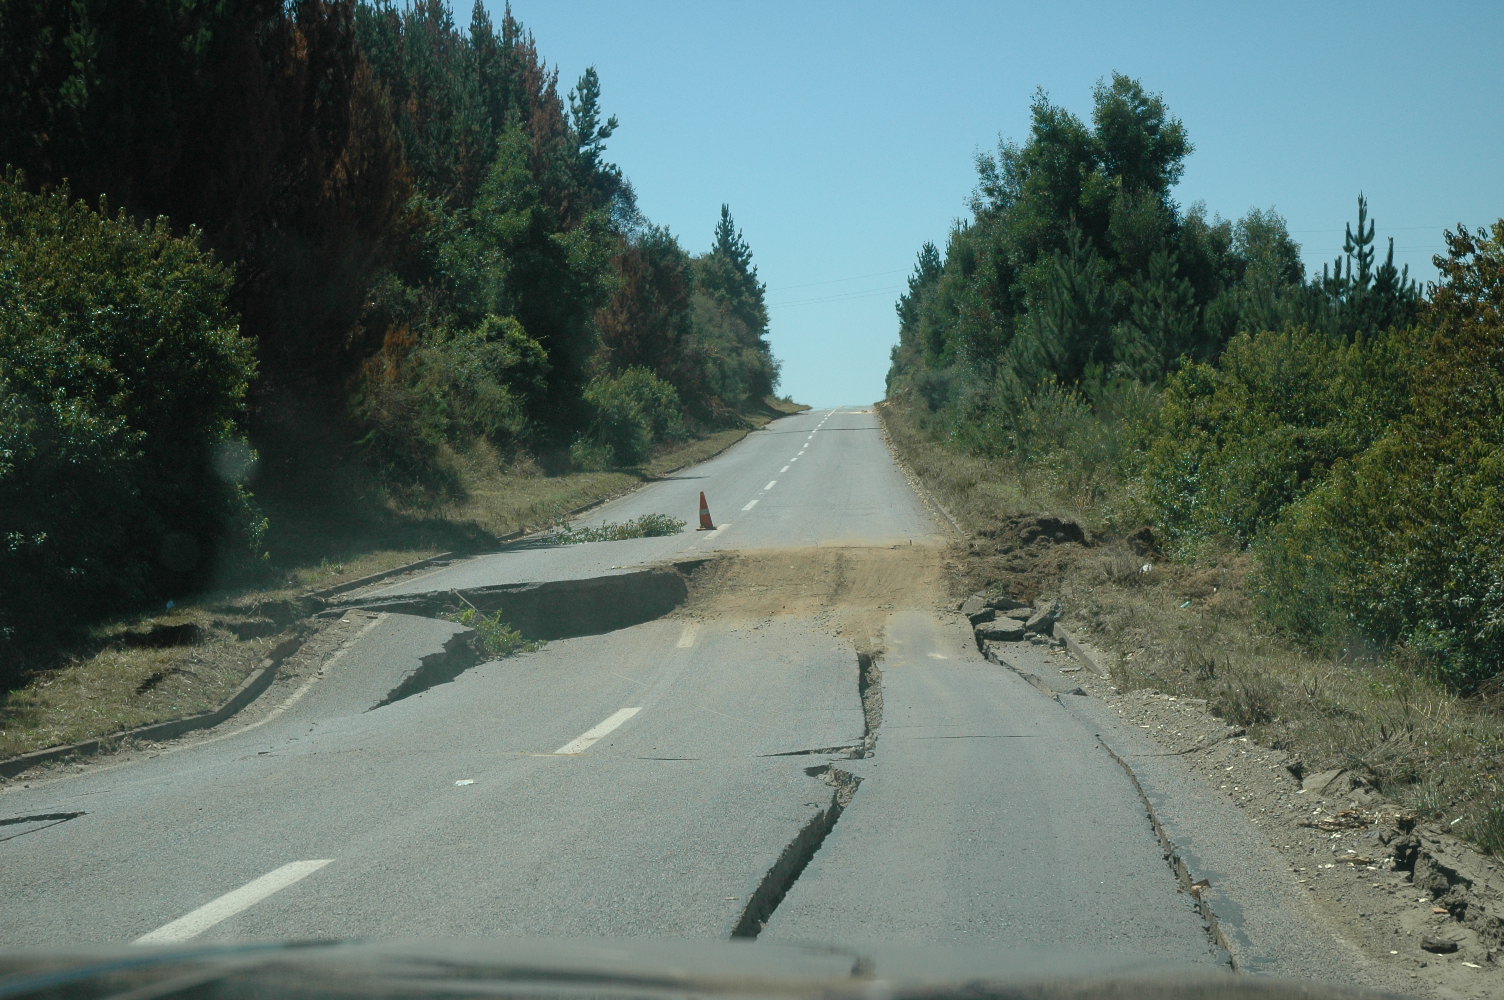 Earthquake Photos: The Long Road Home, Part One